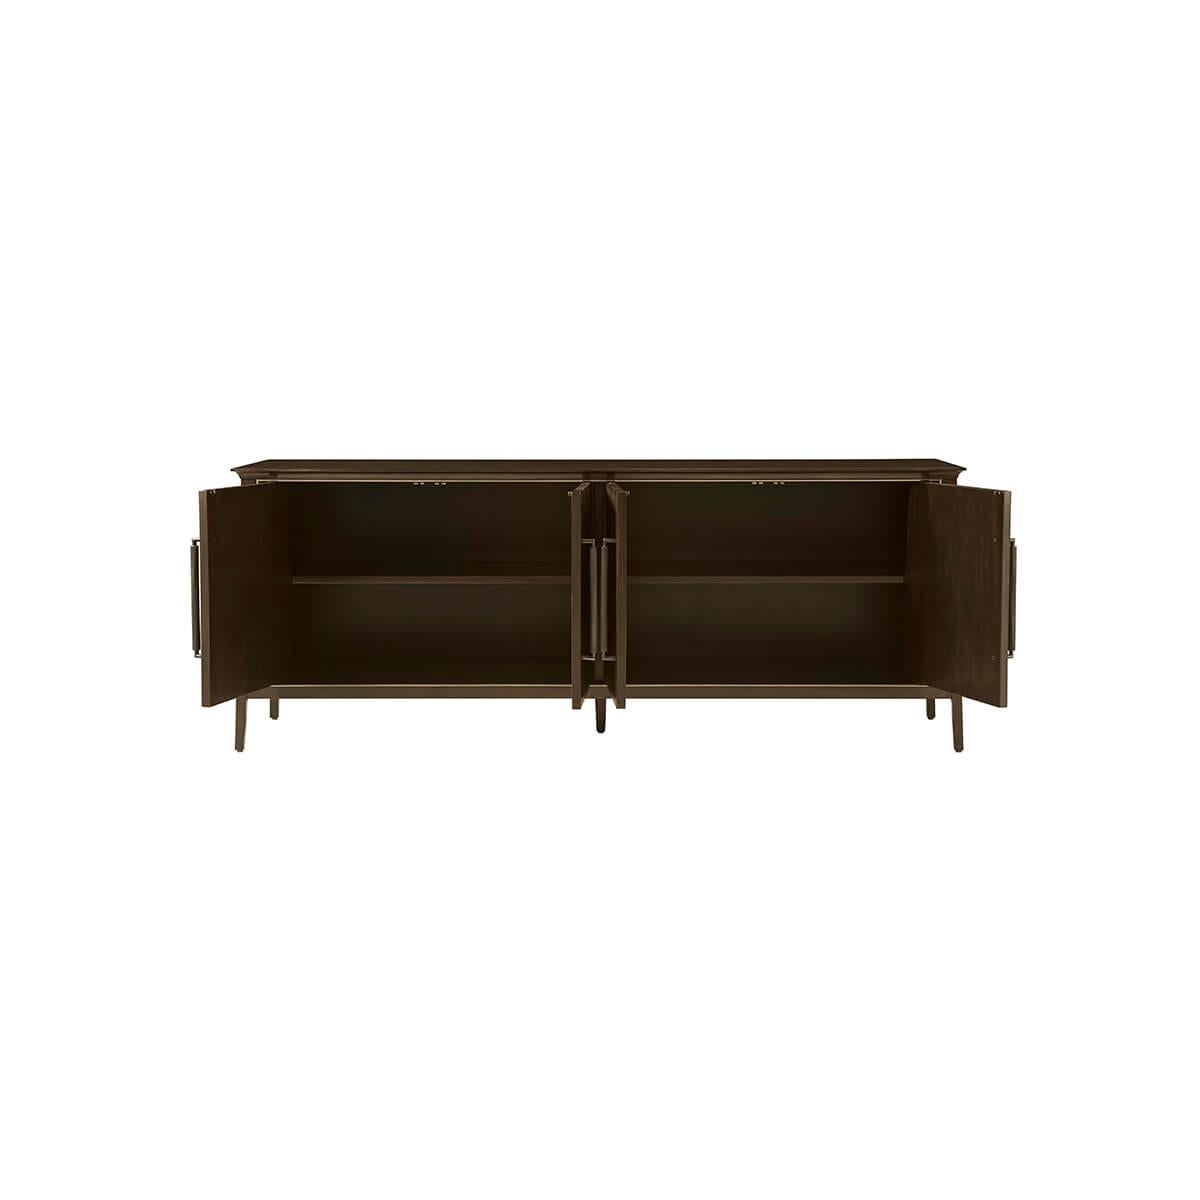 Mid Century Credenza, features a sophisticated tapering silhouette and reeded angular doors, crafted from Prima Vera in our Bistre finish. The custom forged hardware, finished in a dark rubbed bronze, echoes the reeded details